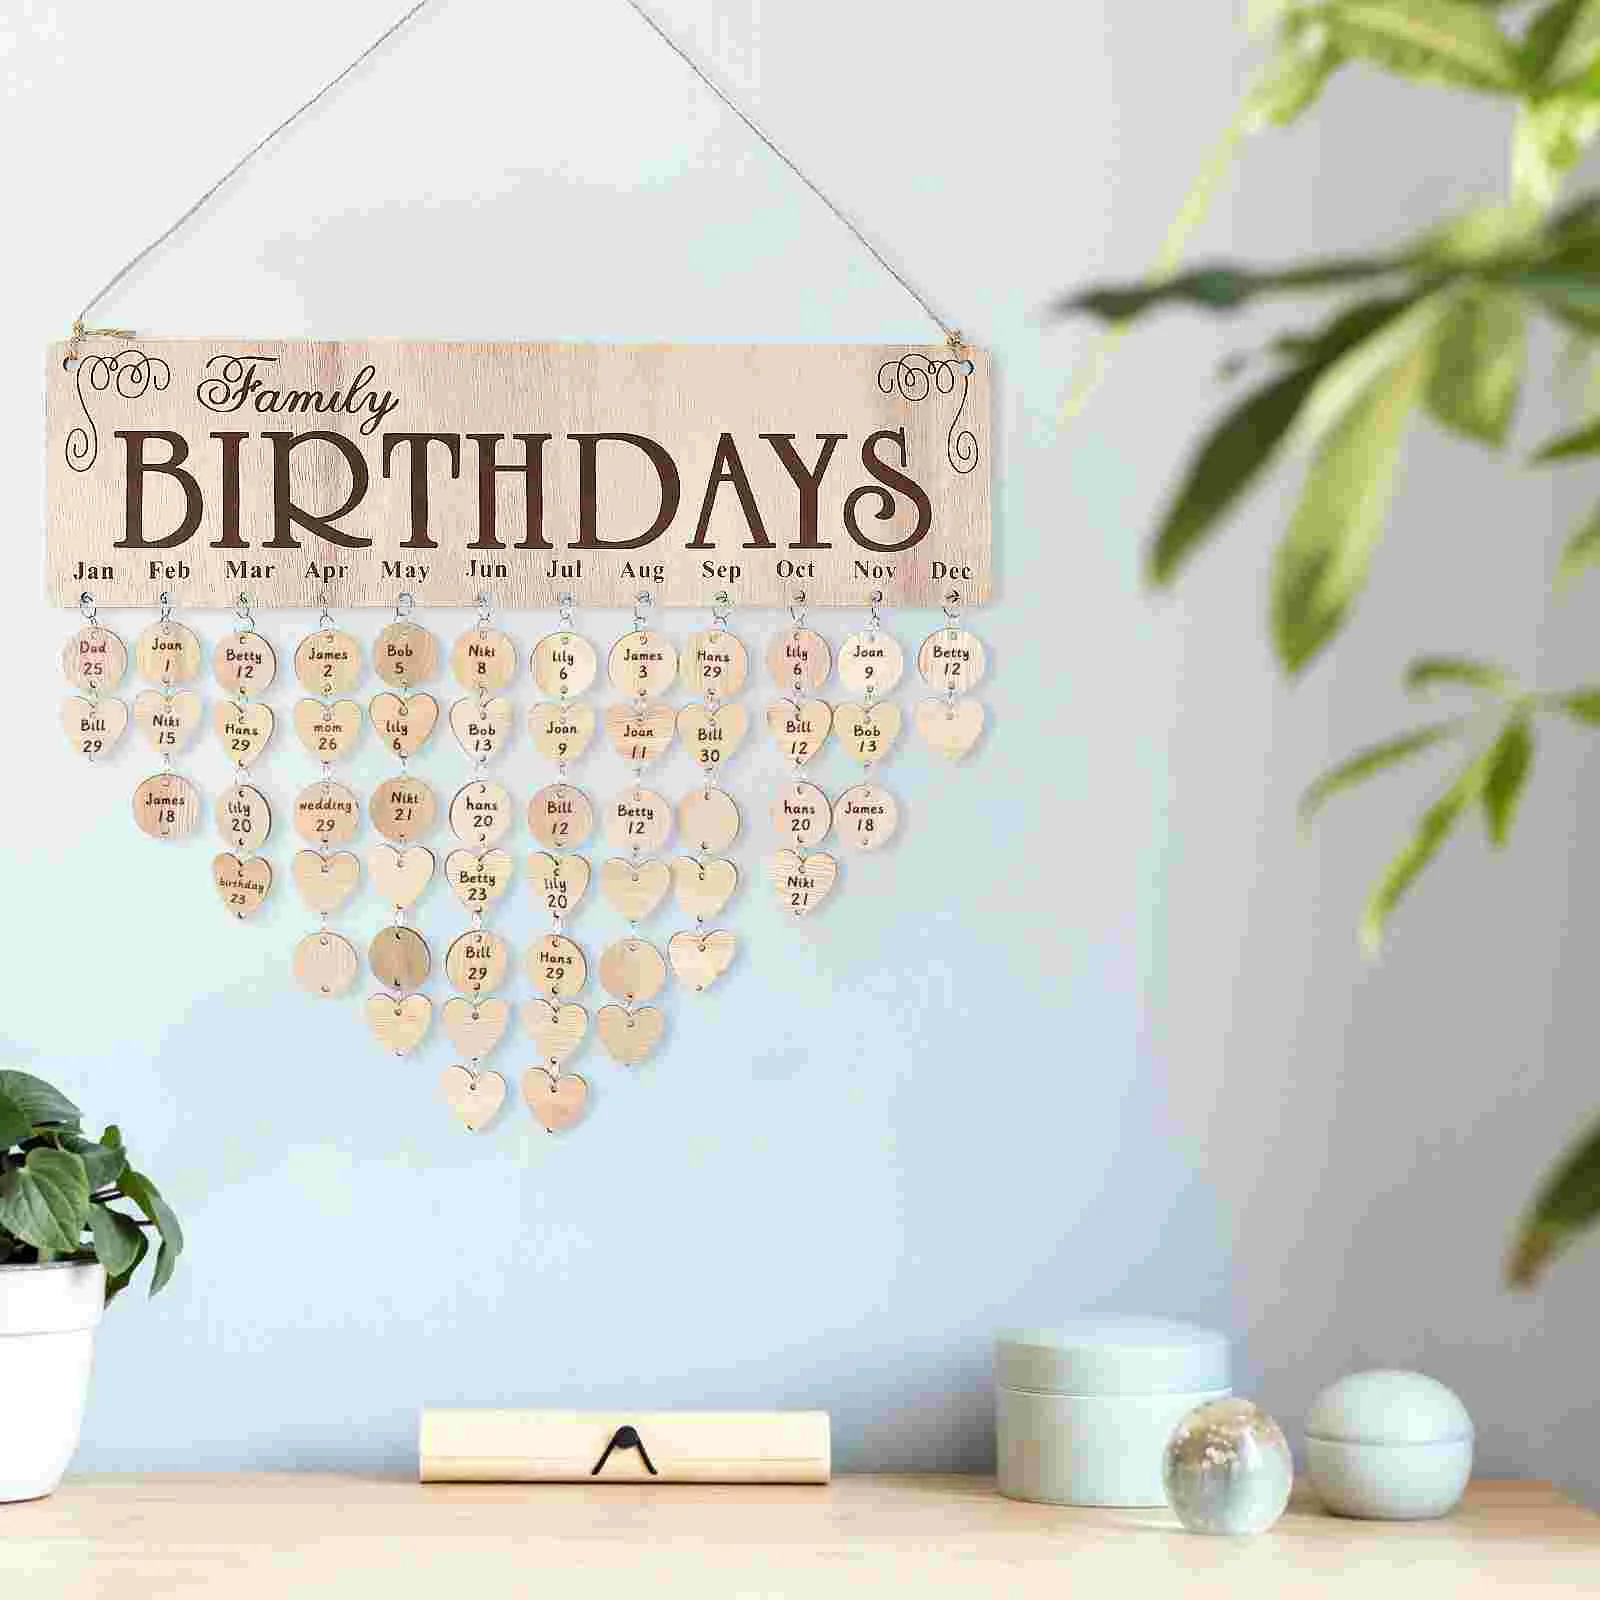 

Calendar Birthday Wooden Family Board Hanging Wall Reminder Decor Tagsdiy Block home Advent Bulletin Plaque Board For Christmas